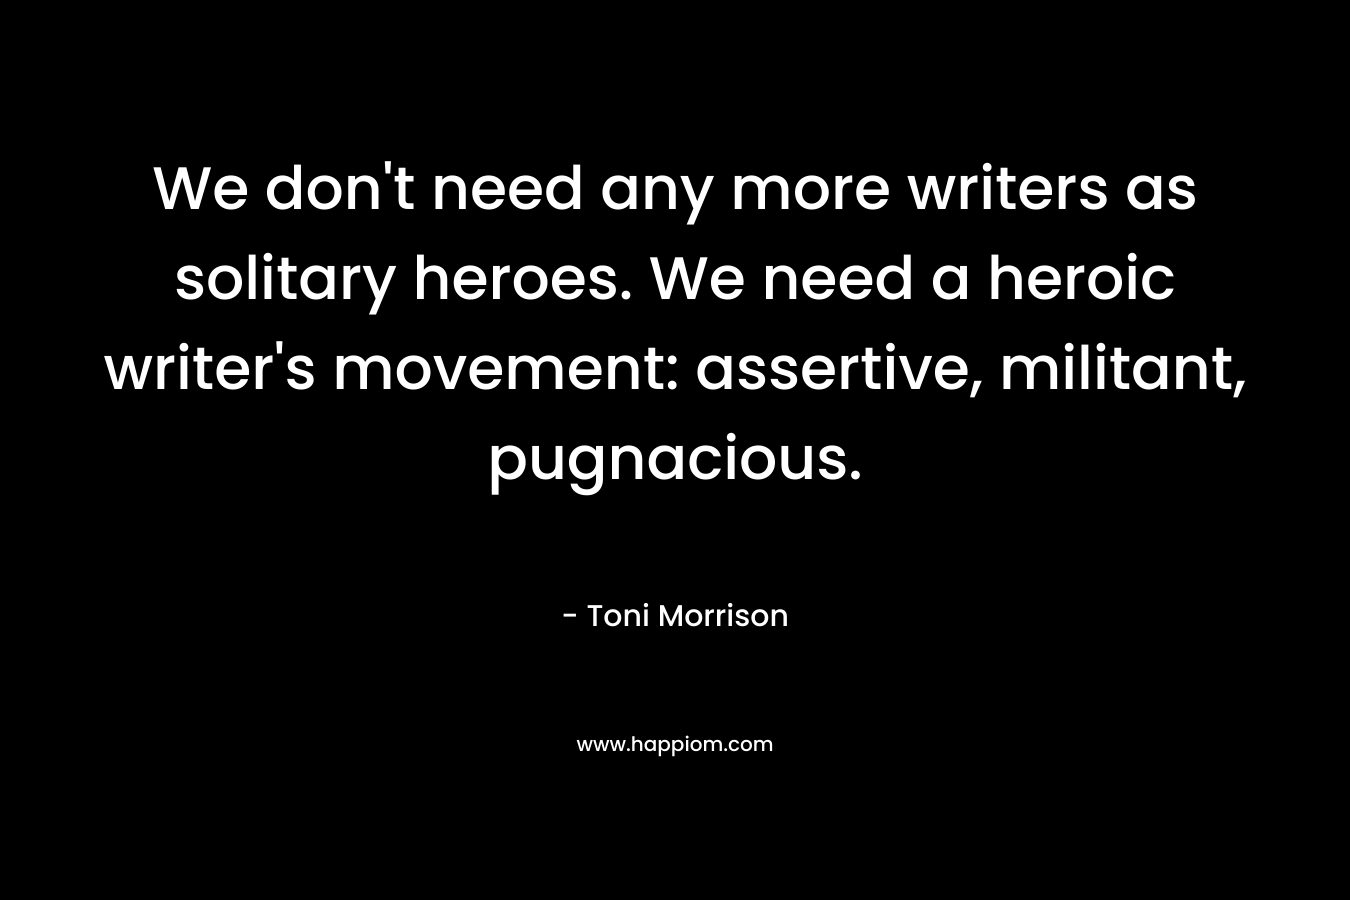 We don't need any more writers as solitary heroes. We need a heroic writer's movement: assertive, militant, pugnacious.